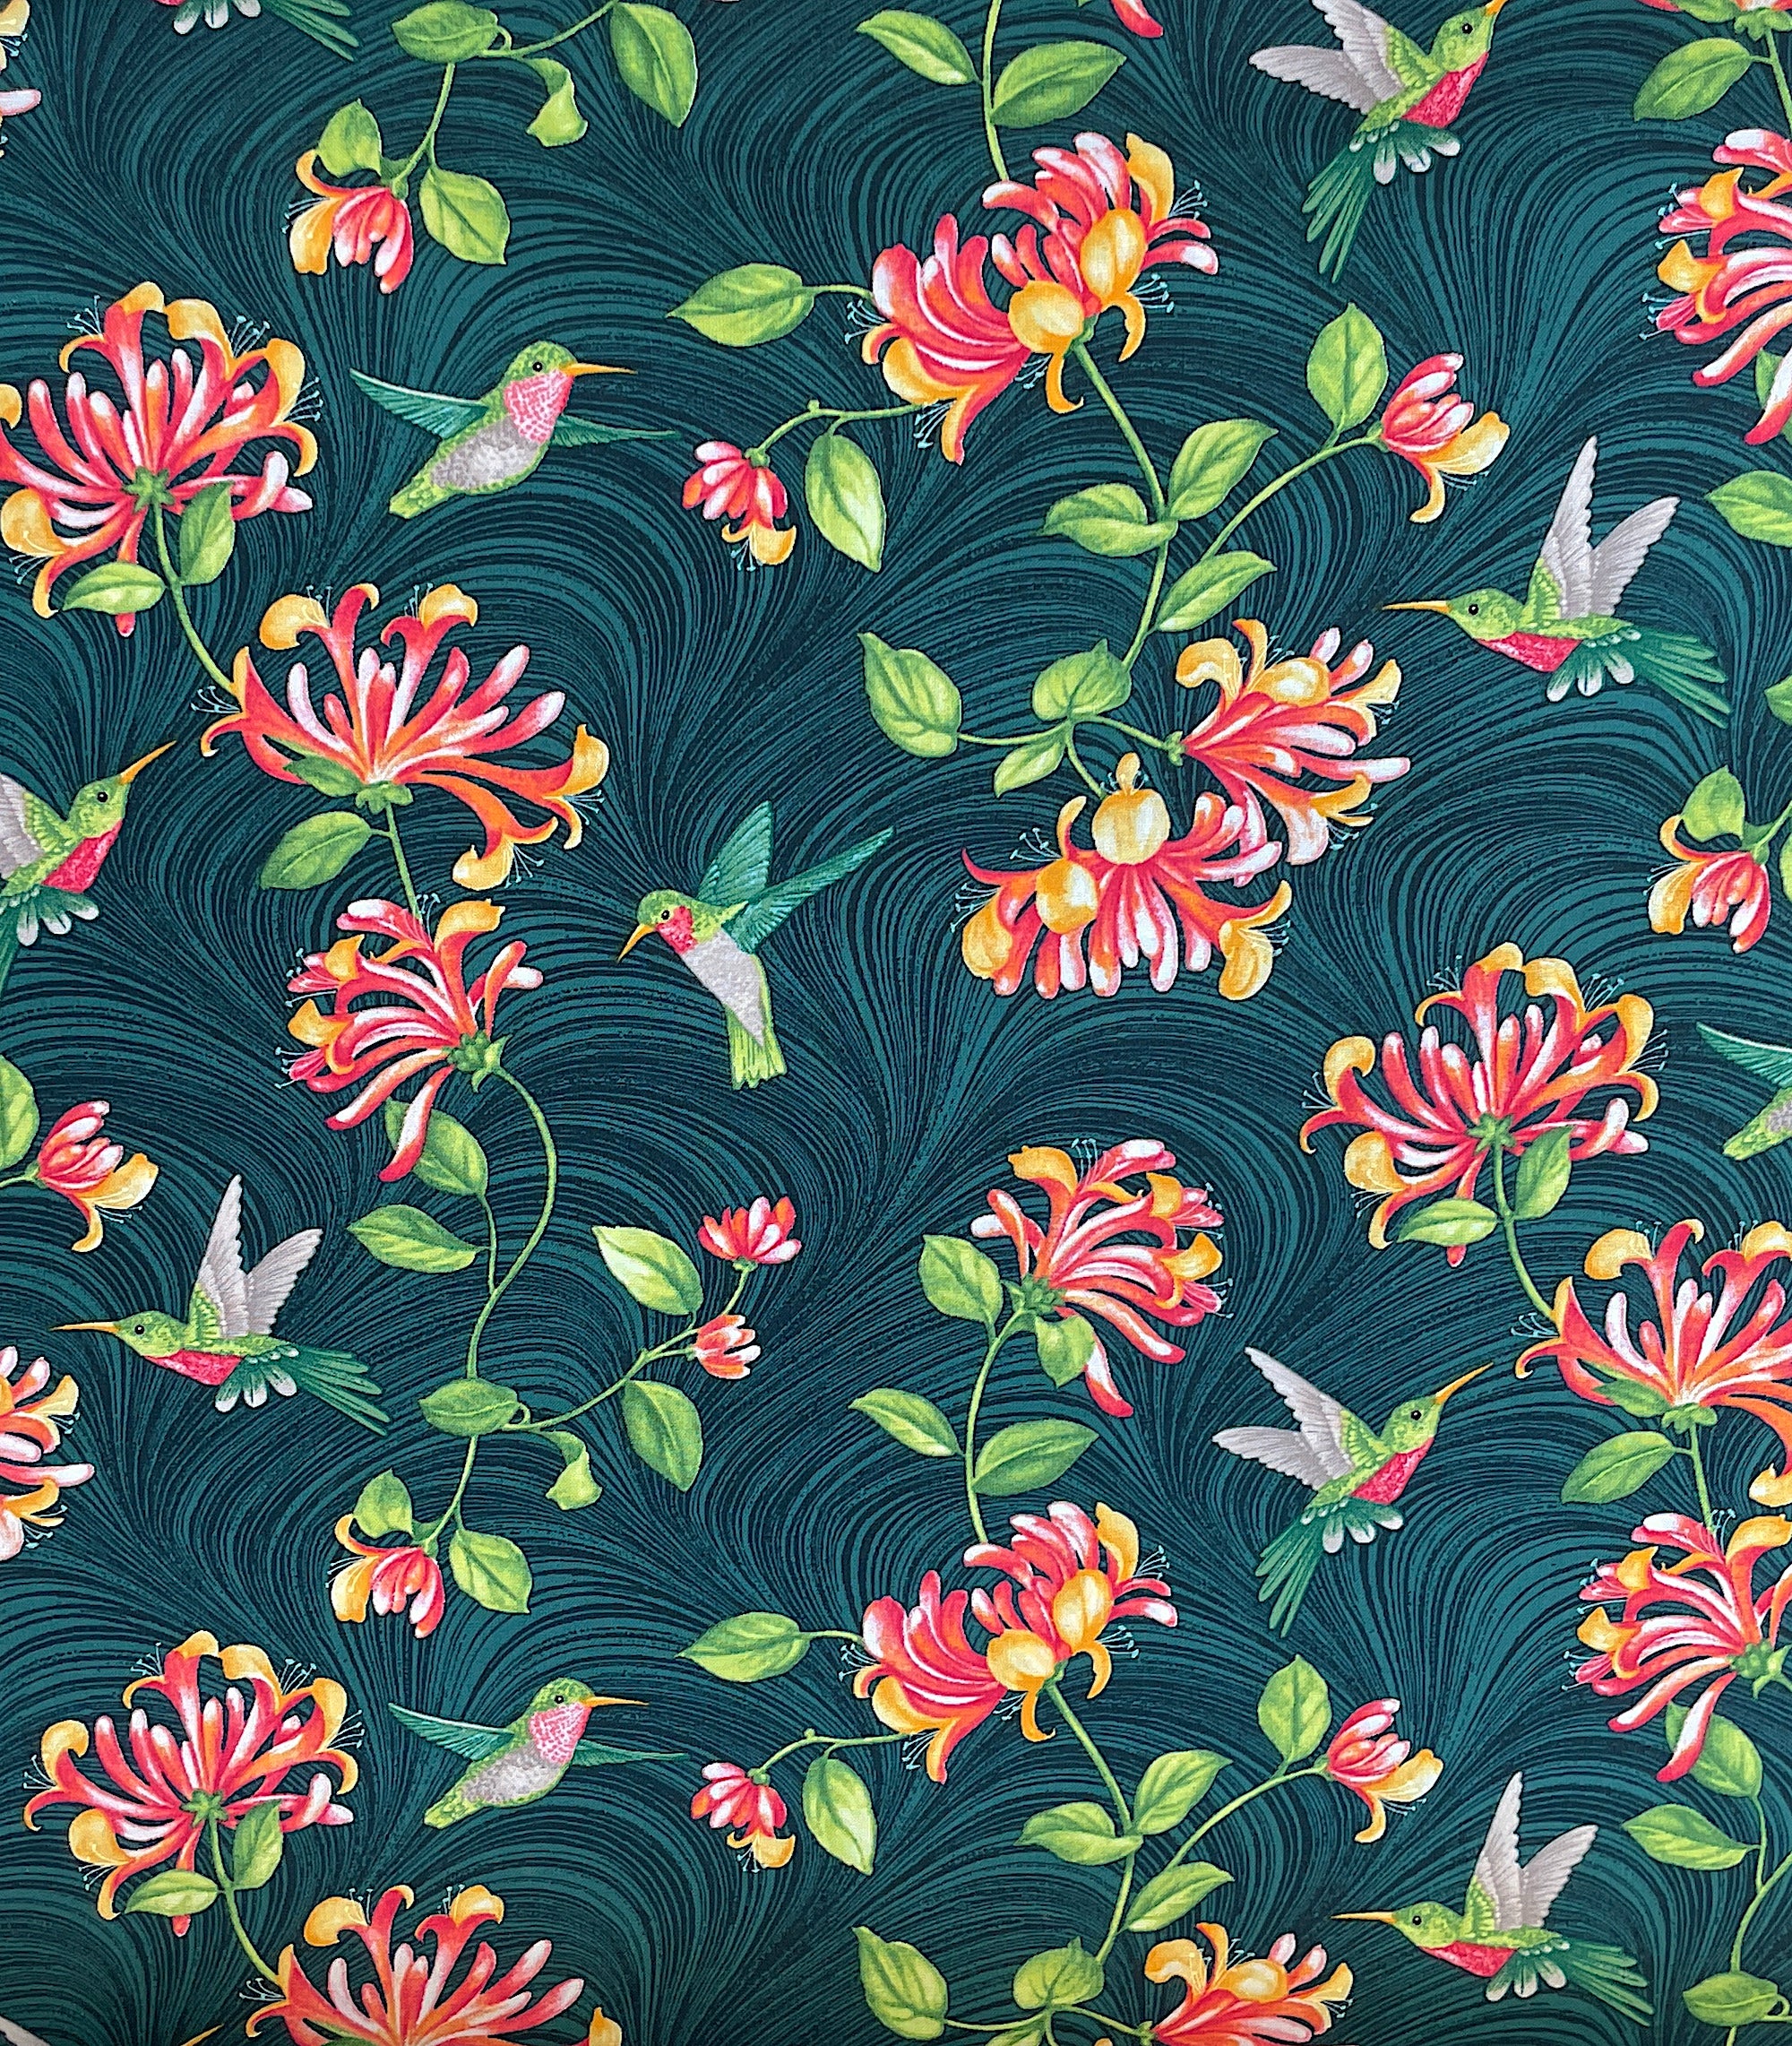 Teal Green cotton fabric covered with hummingbirds and flowers.